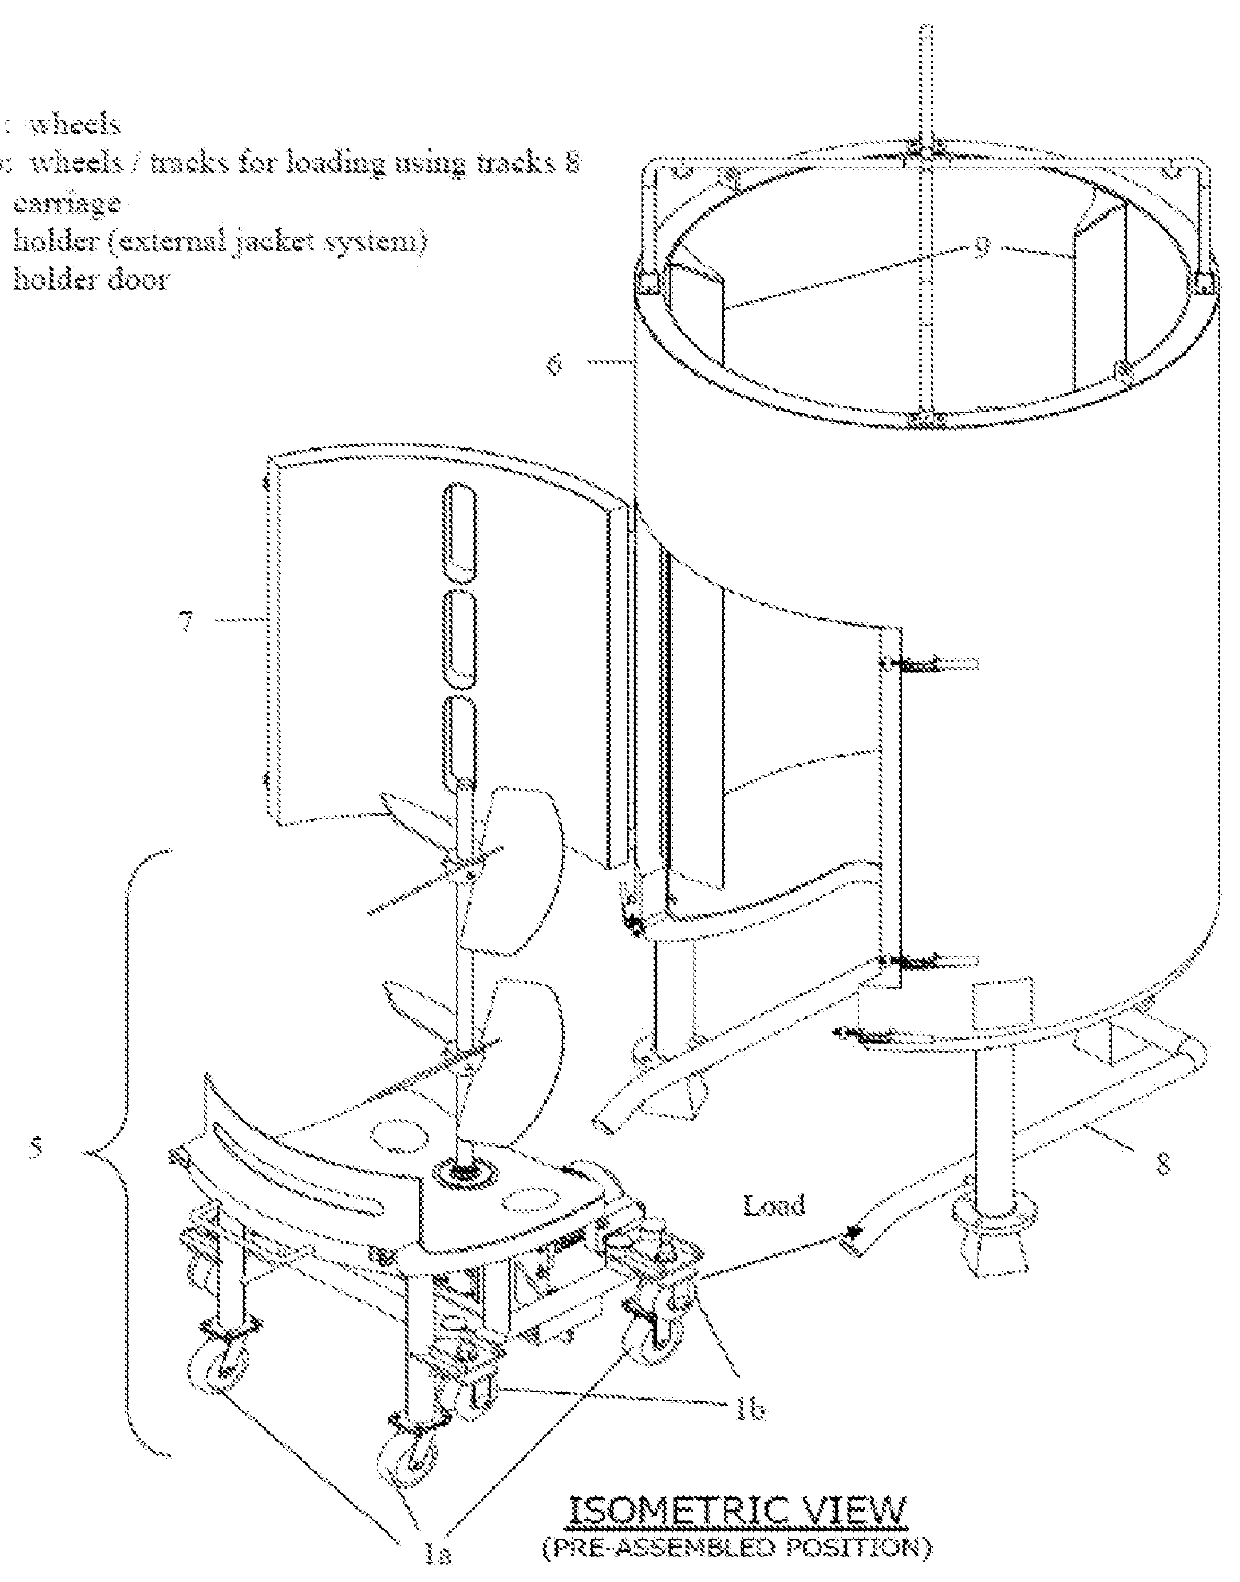 Reactor systems